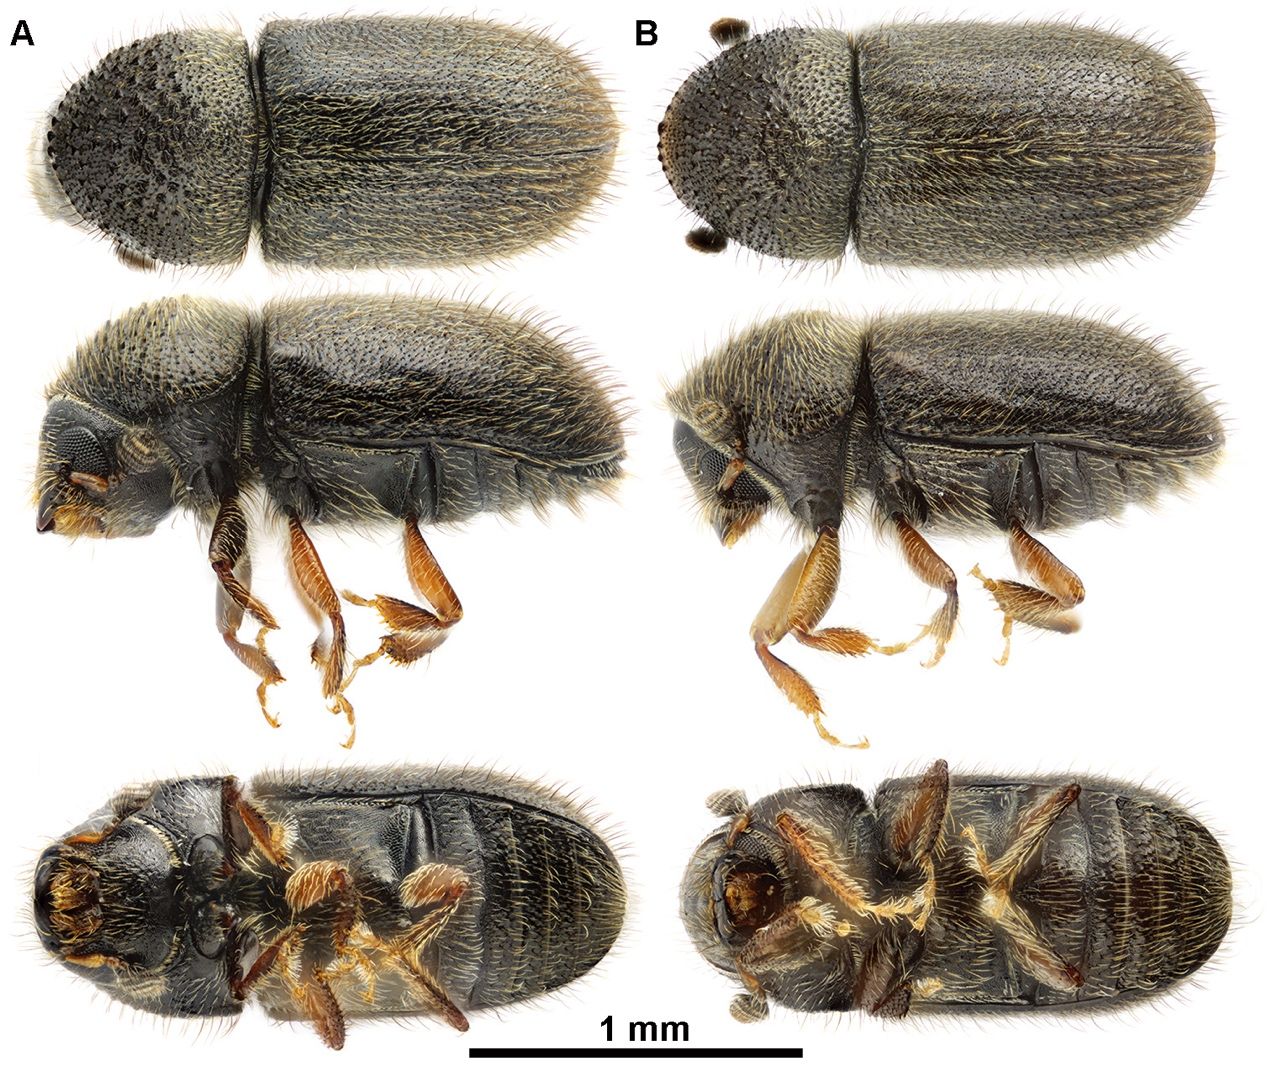 The dorsal, lateral, and ventral surfaces of the adult Cryphalus lipingensis. A) the female individual; B) the male individual. 